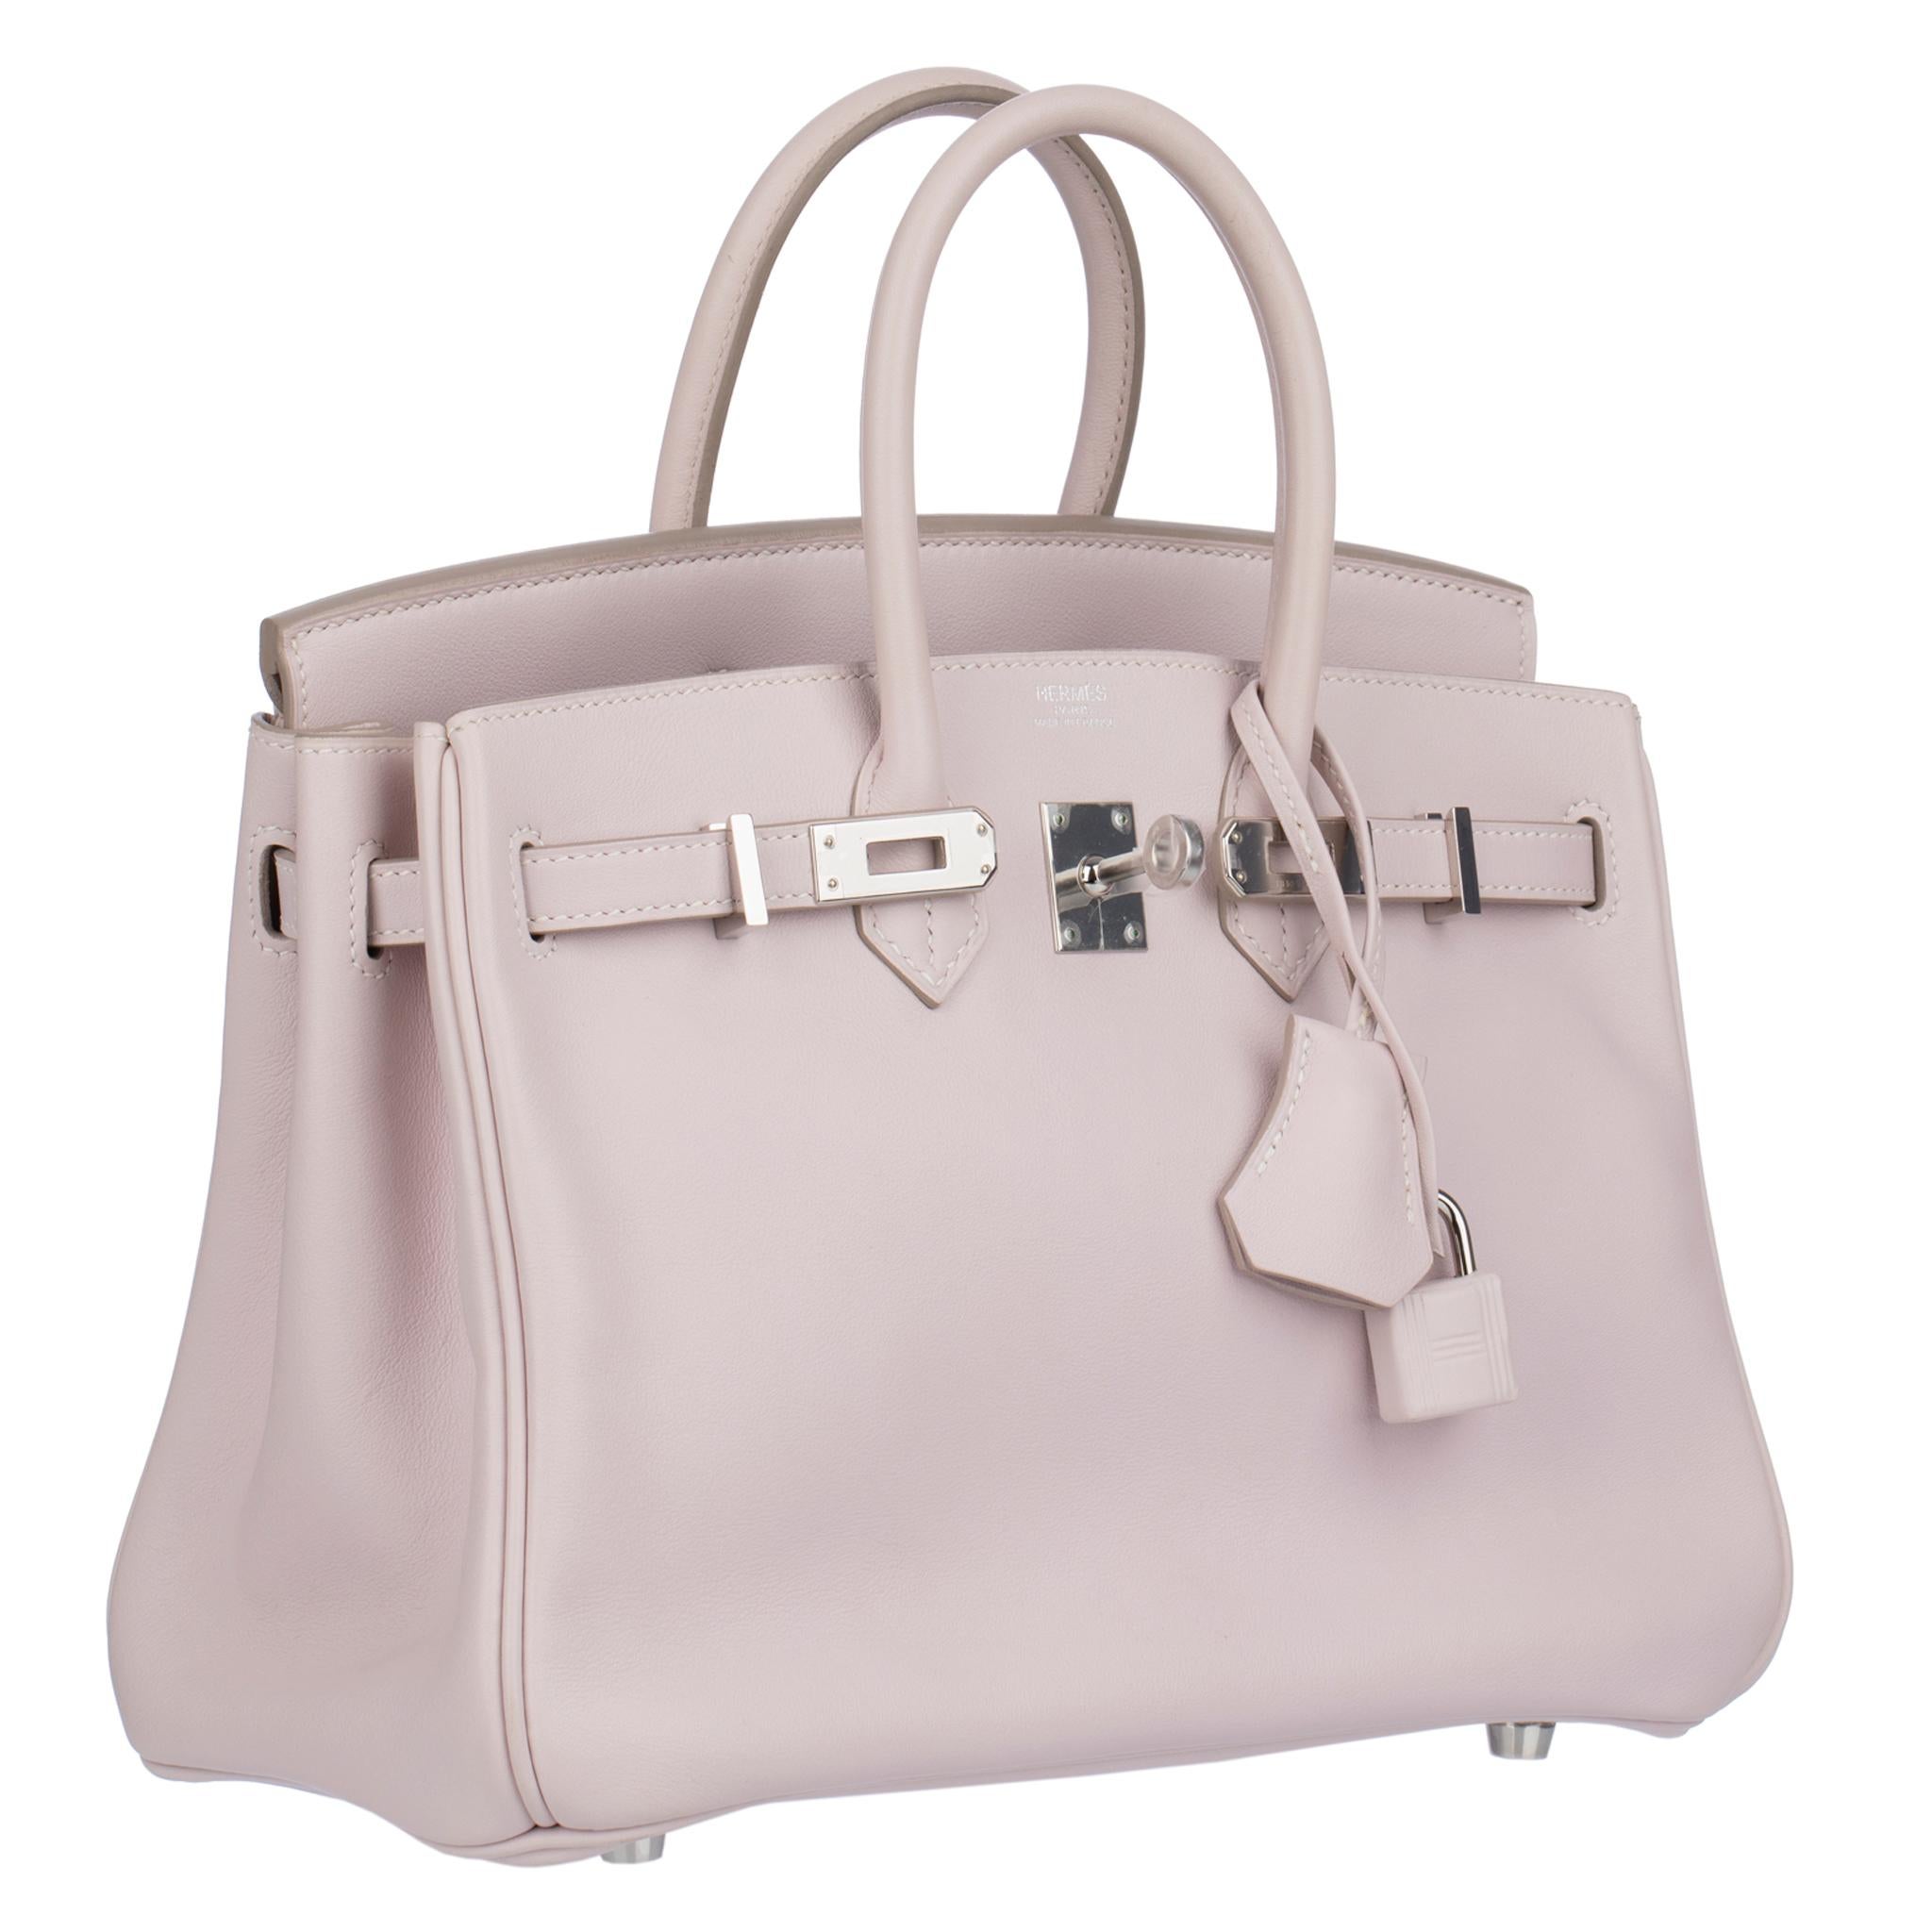 Hermes Birkin 25cm Rose Dragee Swift Leather Palladium Hardware In Excellent Condition For Sale In Sydney, New South Wales